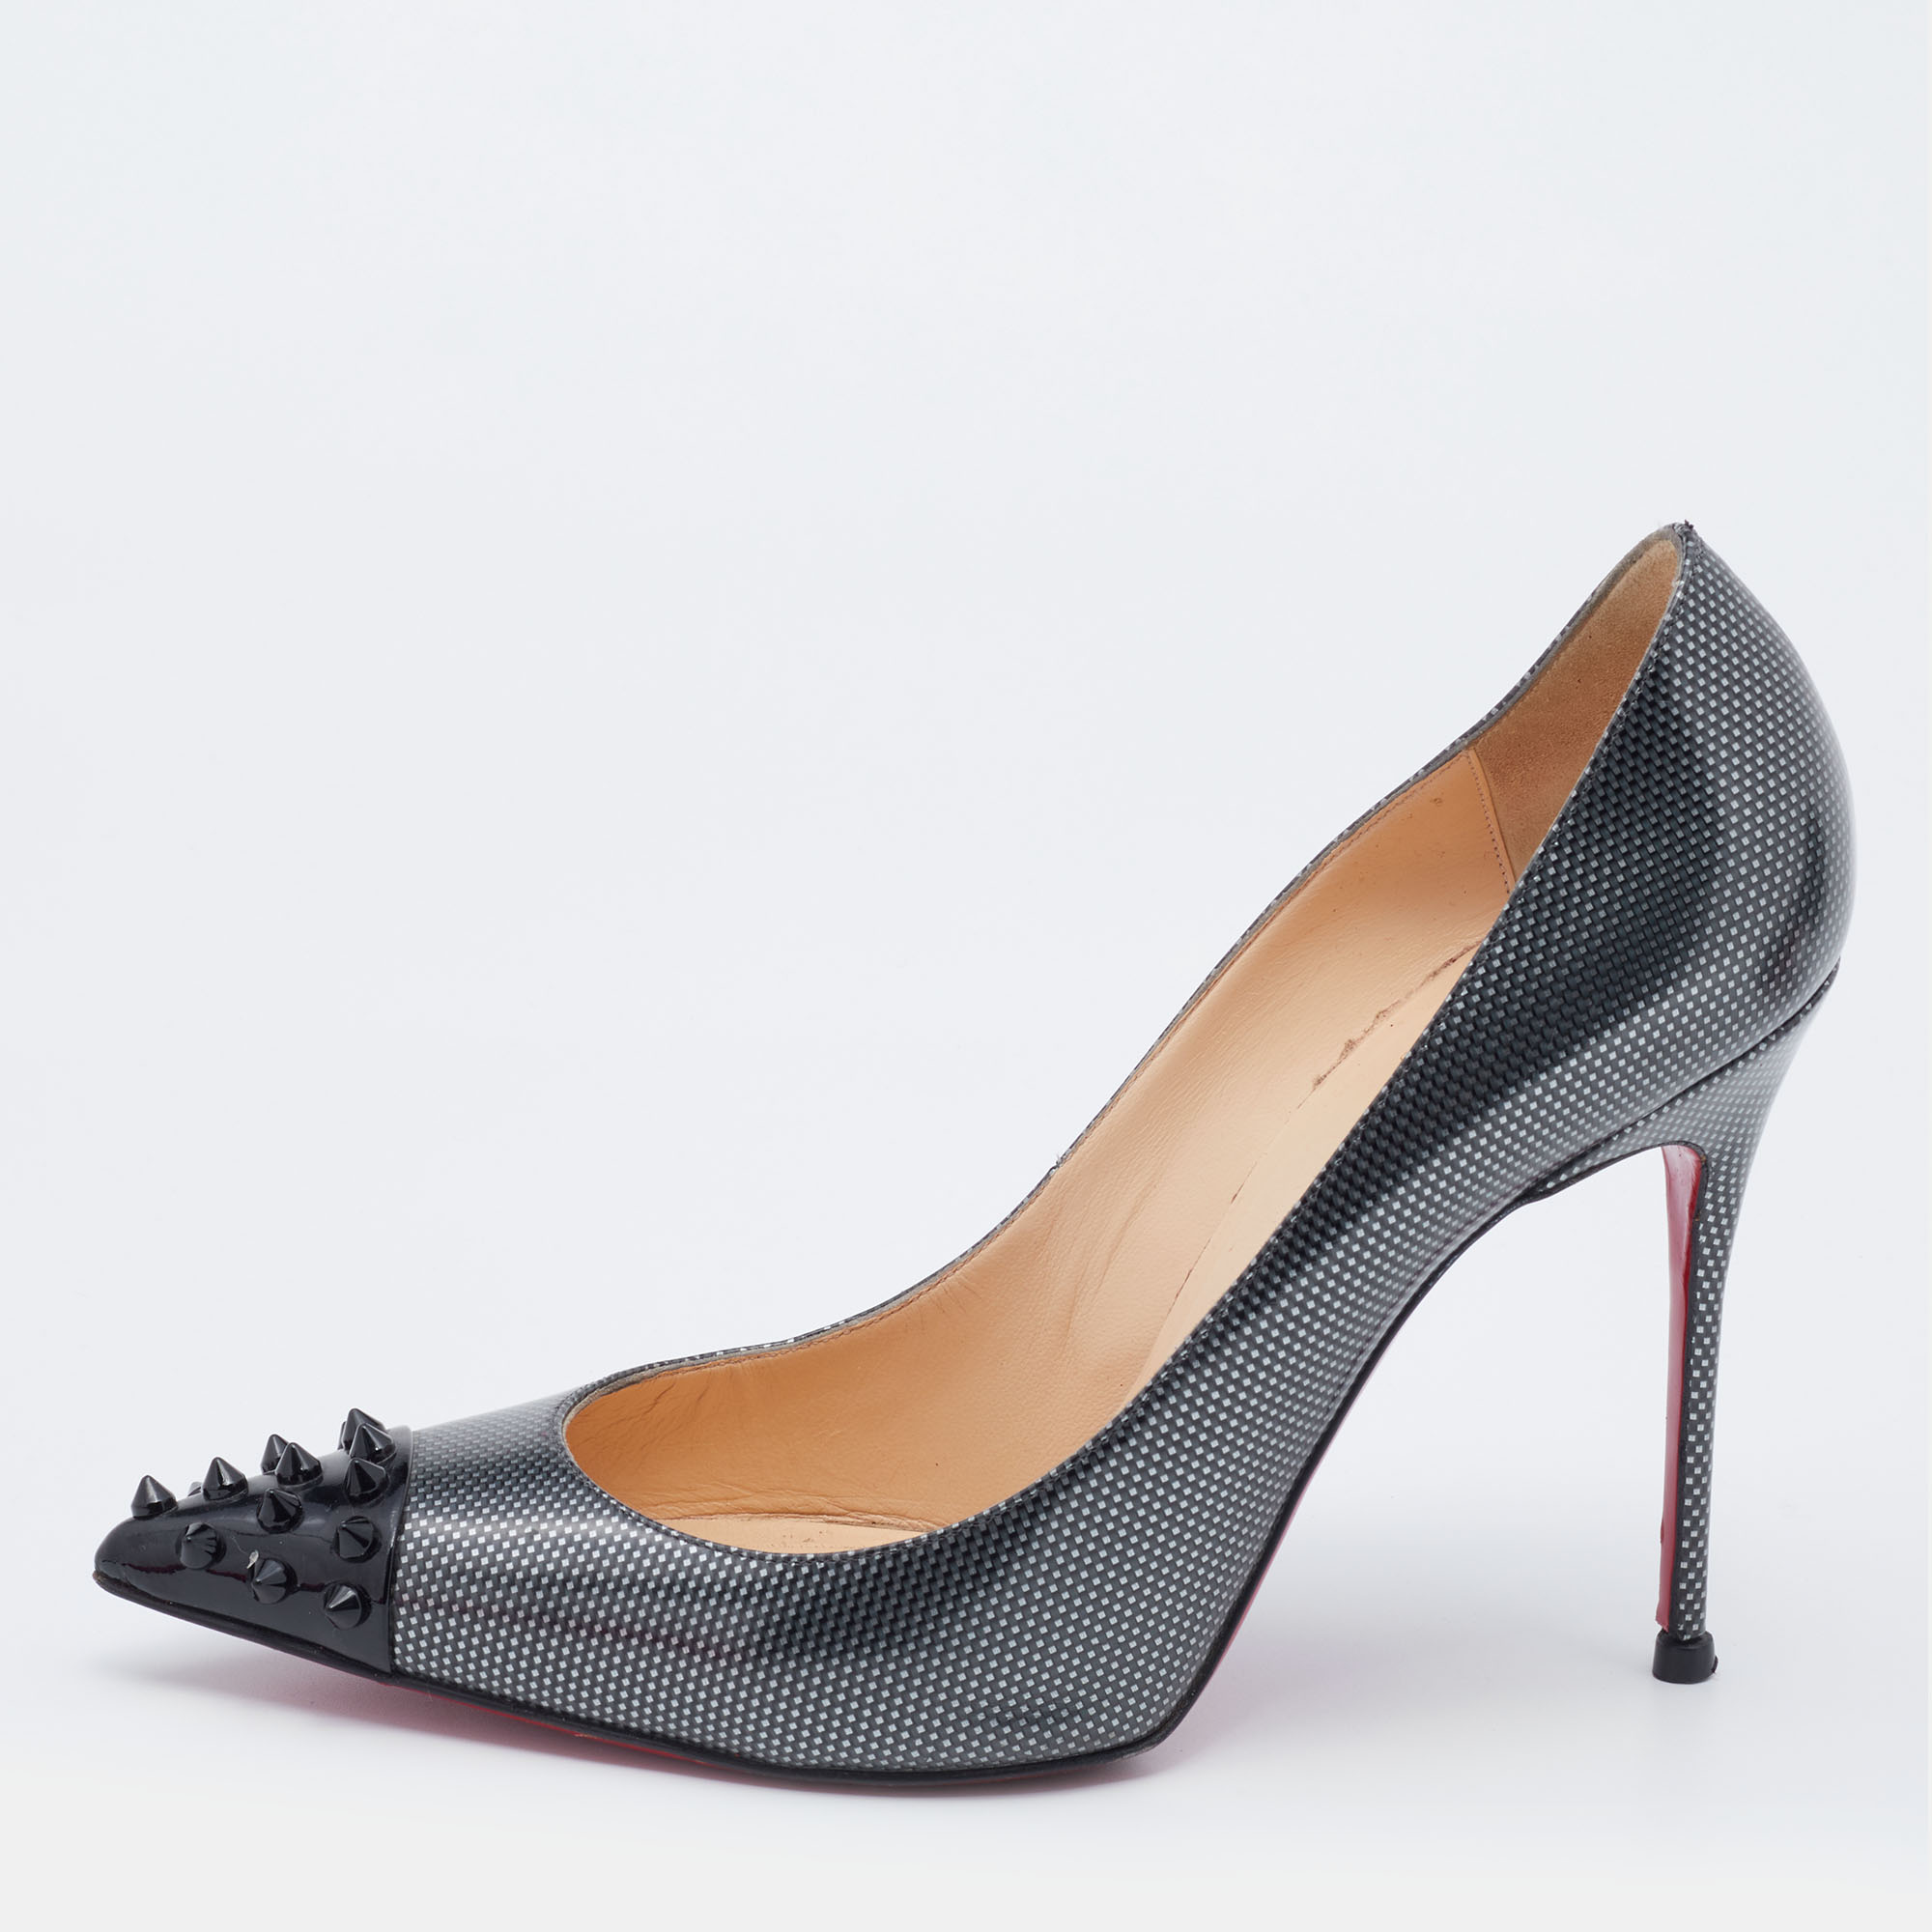 Christian Louboutin Two Tone Textured Leather Geo Spiked Pointed Toe Pumps Size 40.5